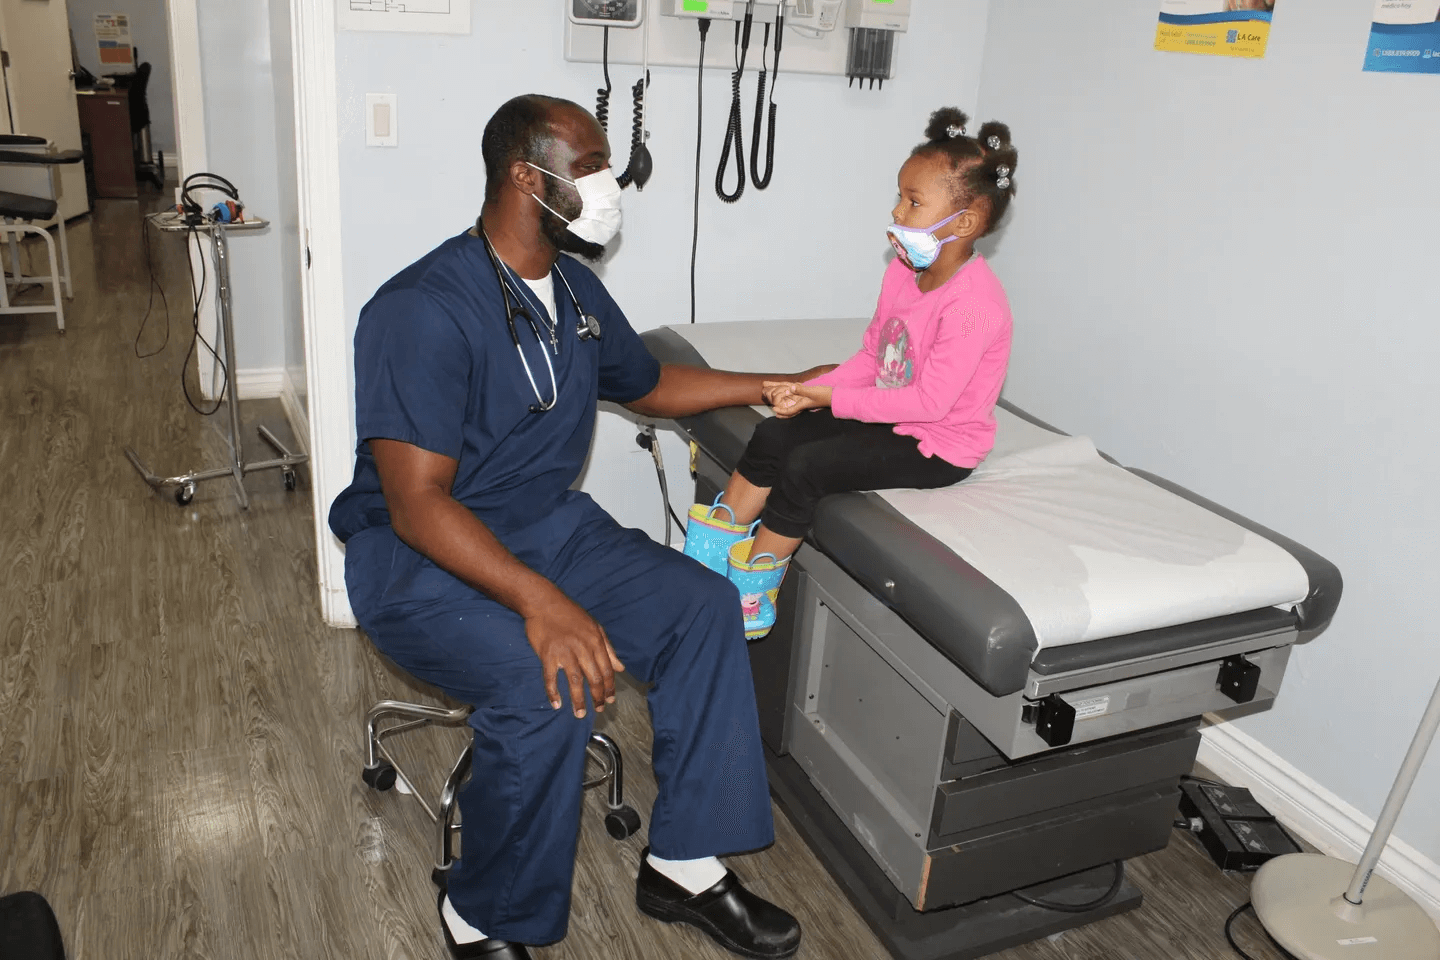 A doctor sitting next to a little girl.